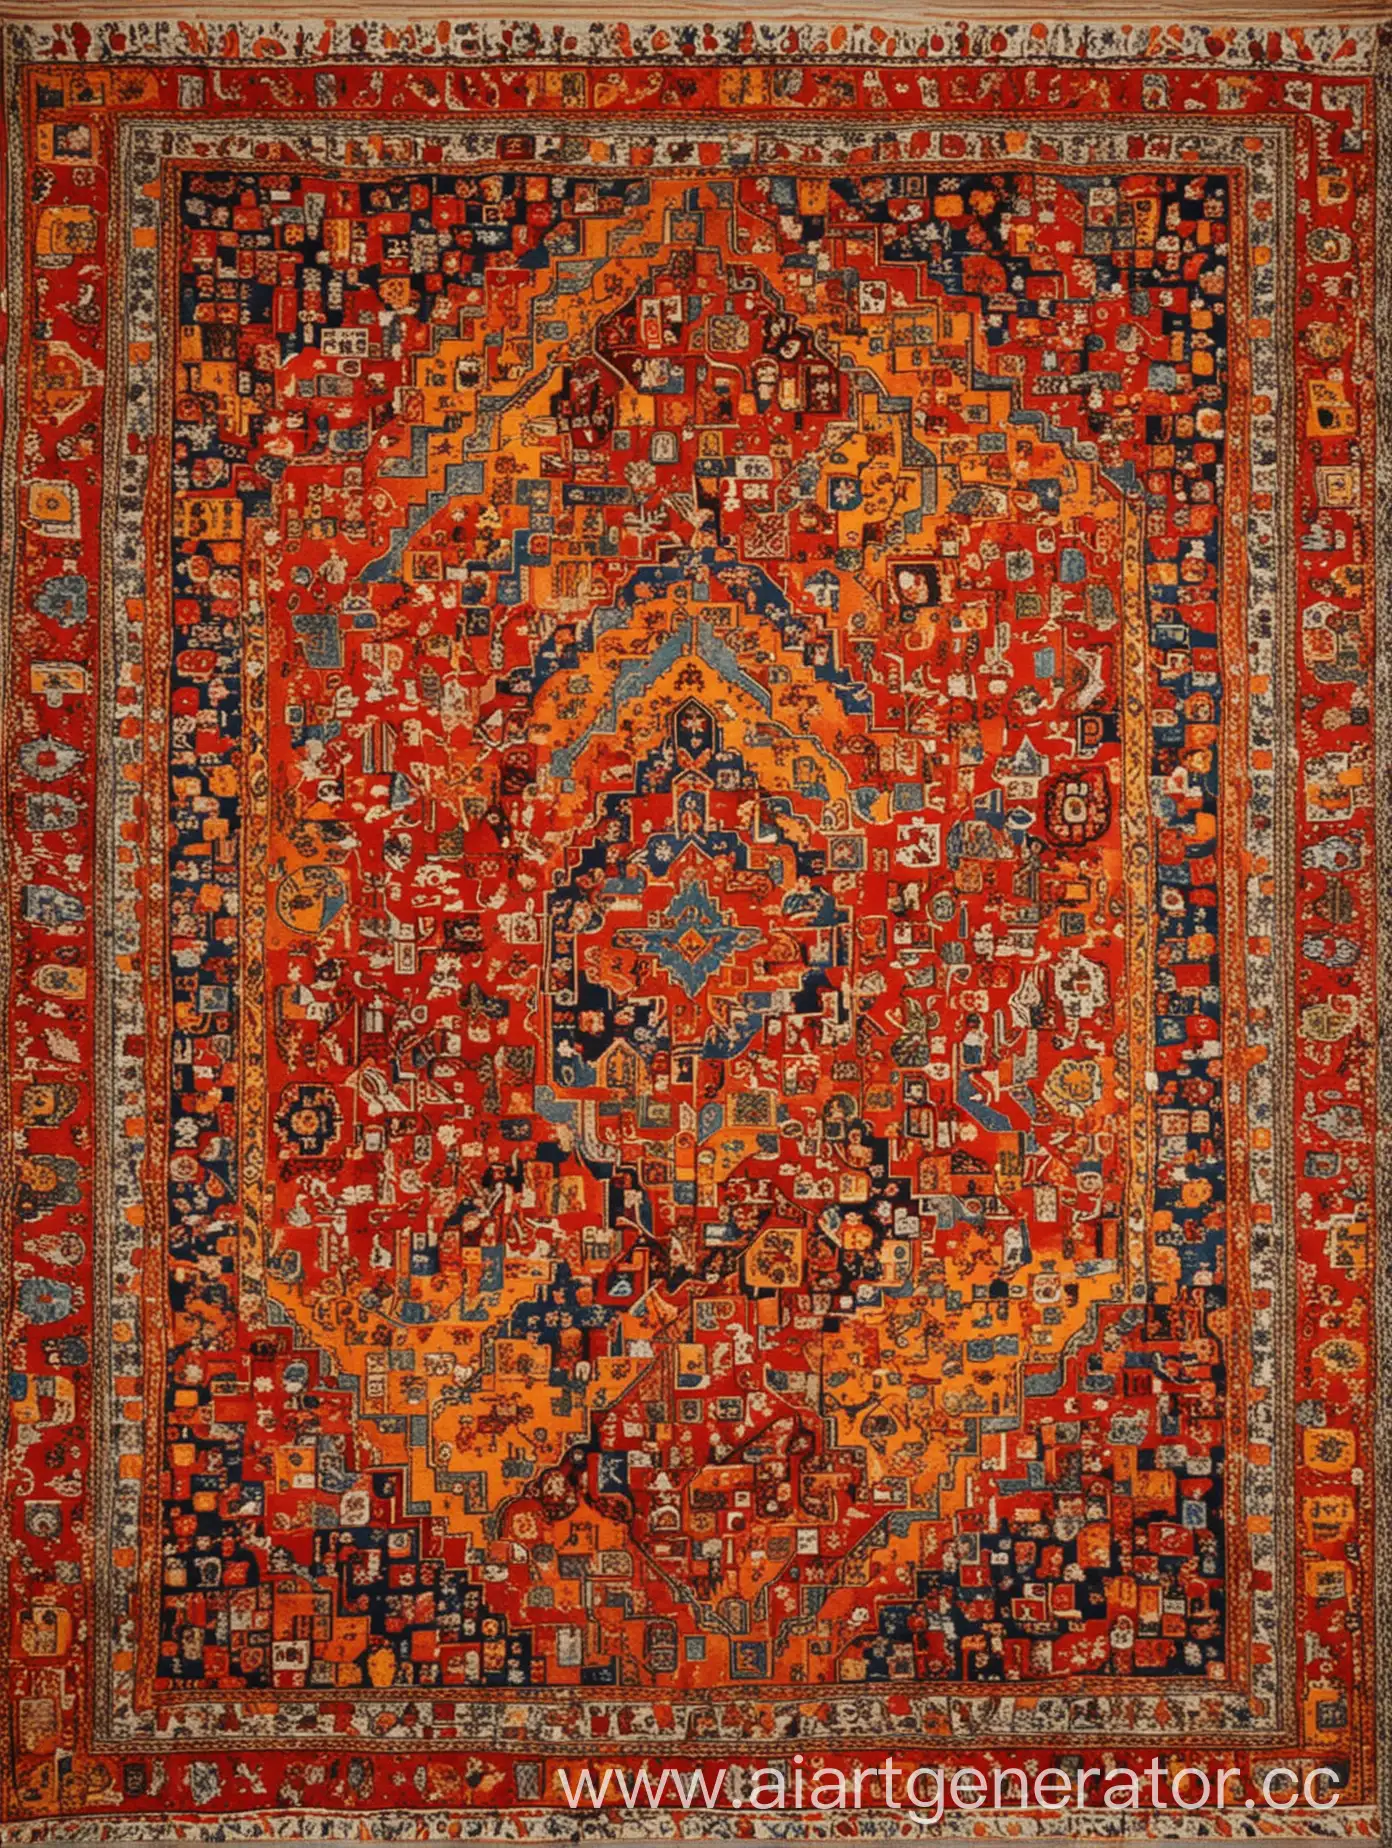 make Armenian carpet with red yellow orange colors